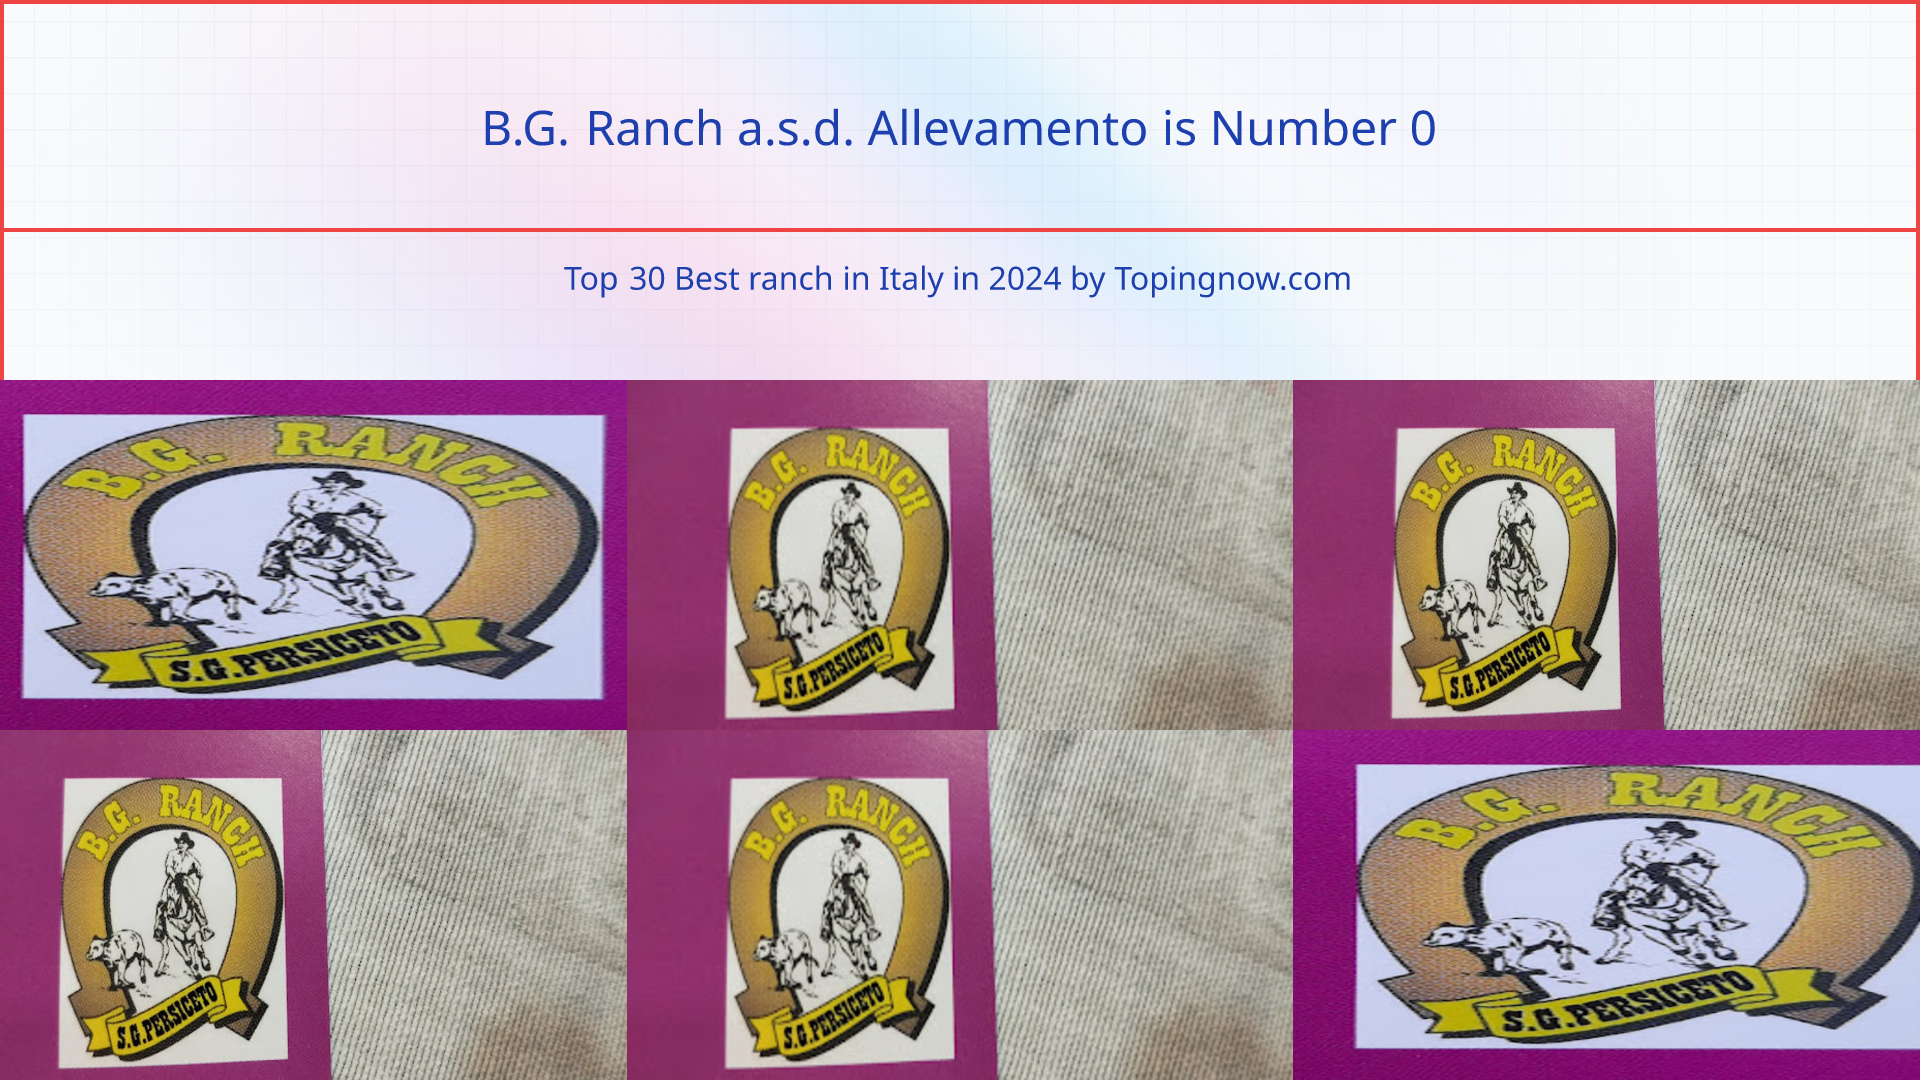 B.G. Ranch a.s.d. Allevamento: Top 30 Best ranch in Italy in 2024